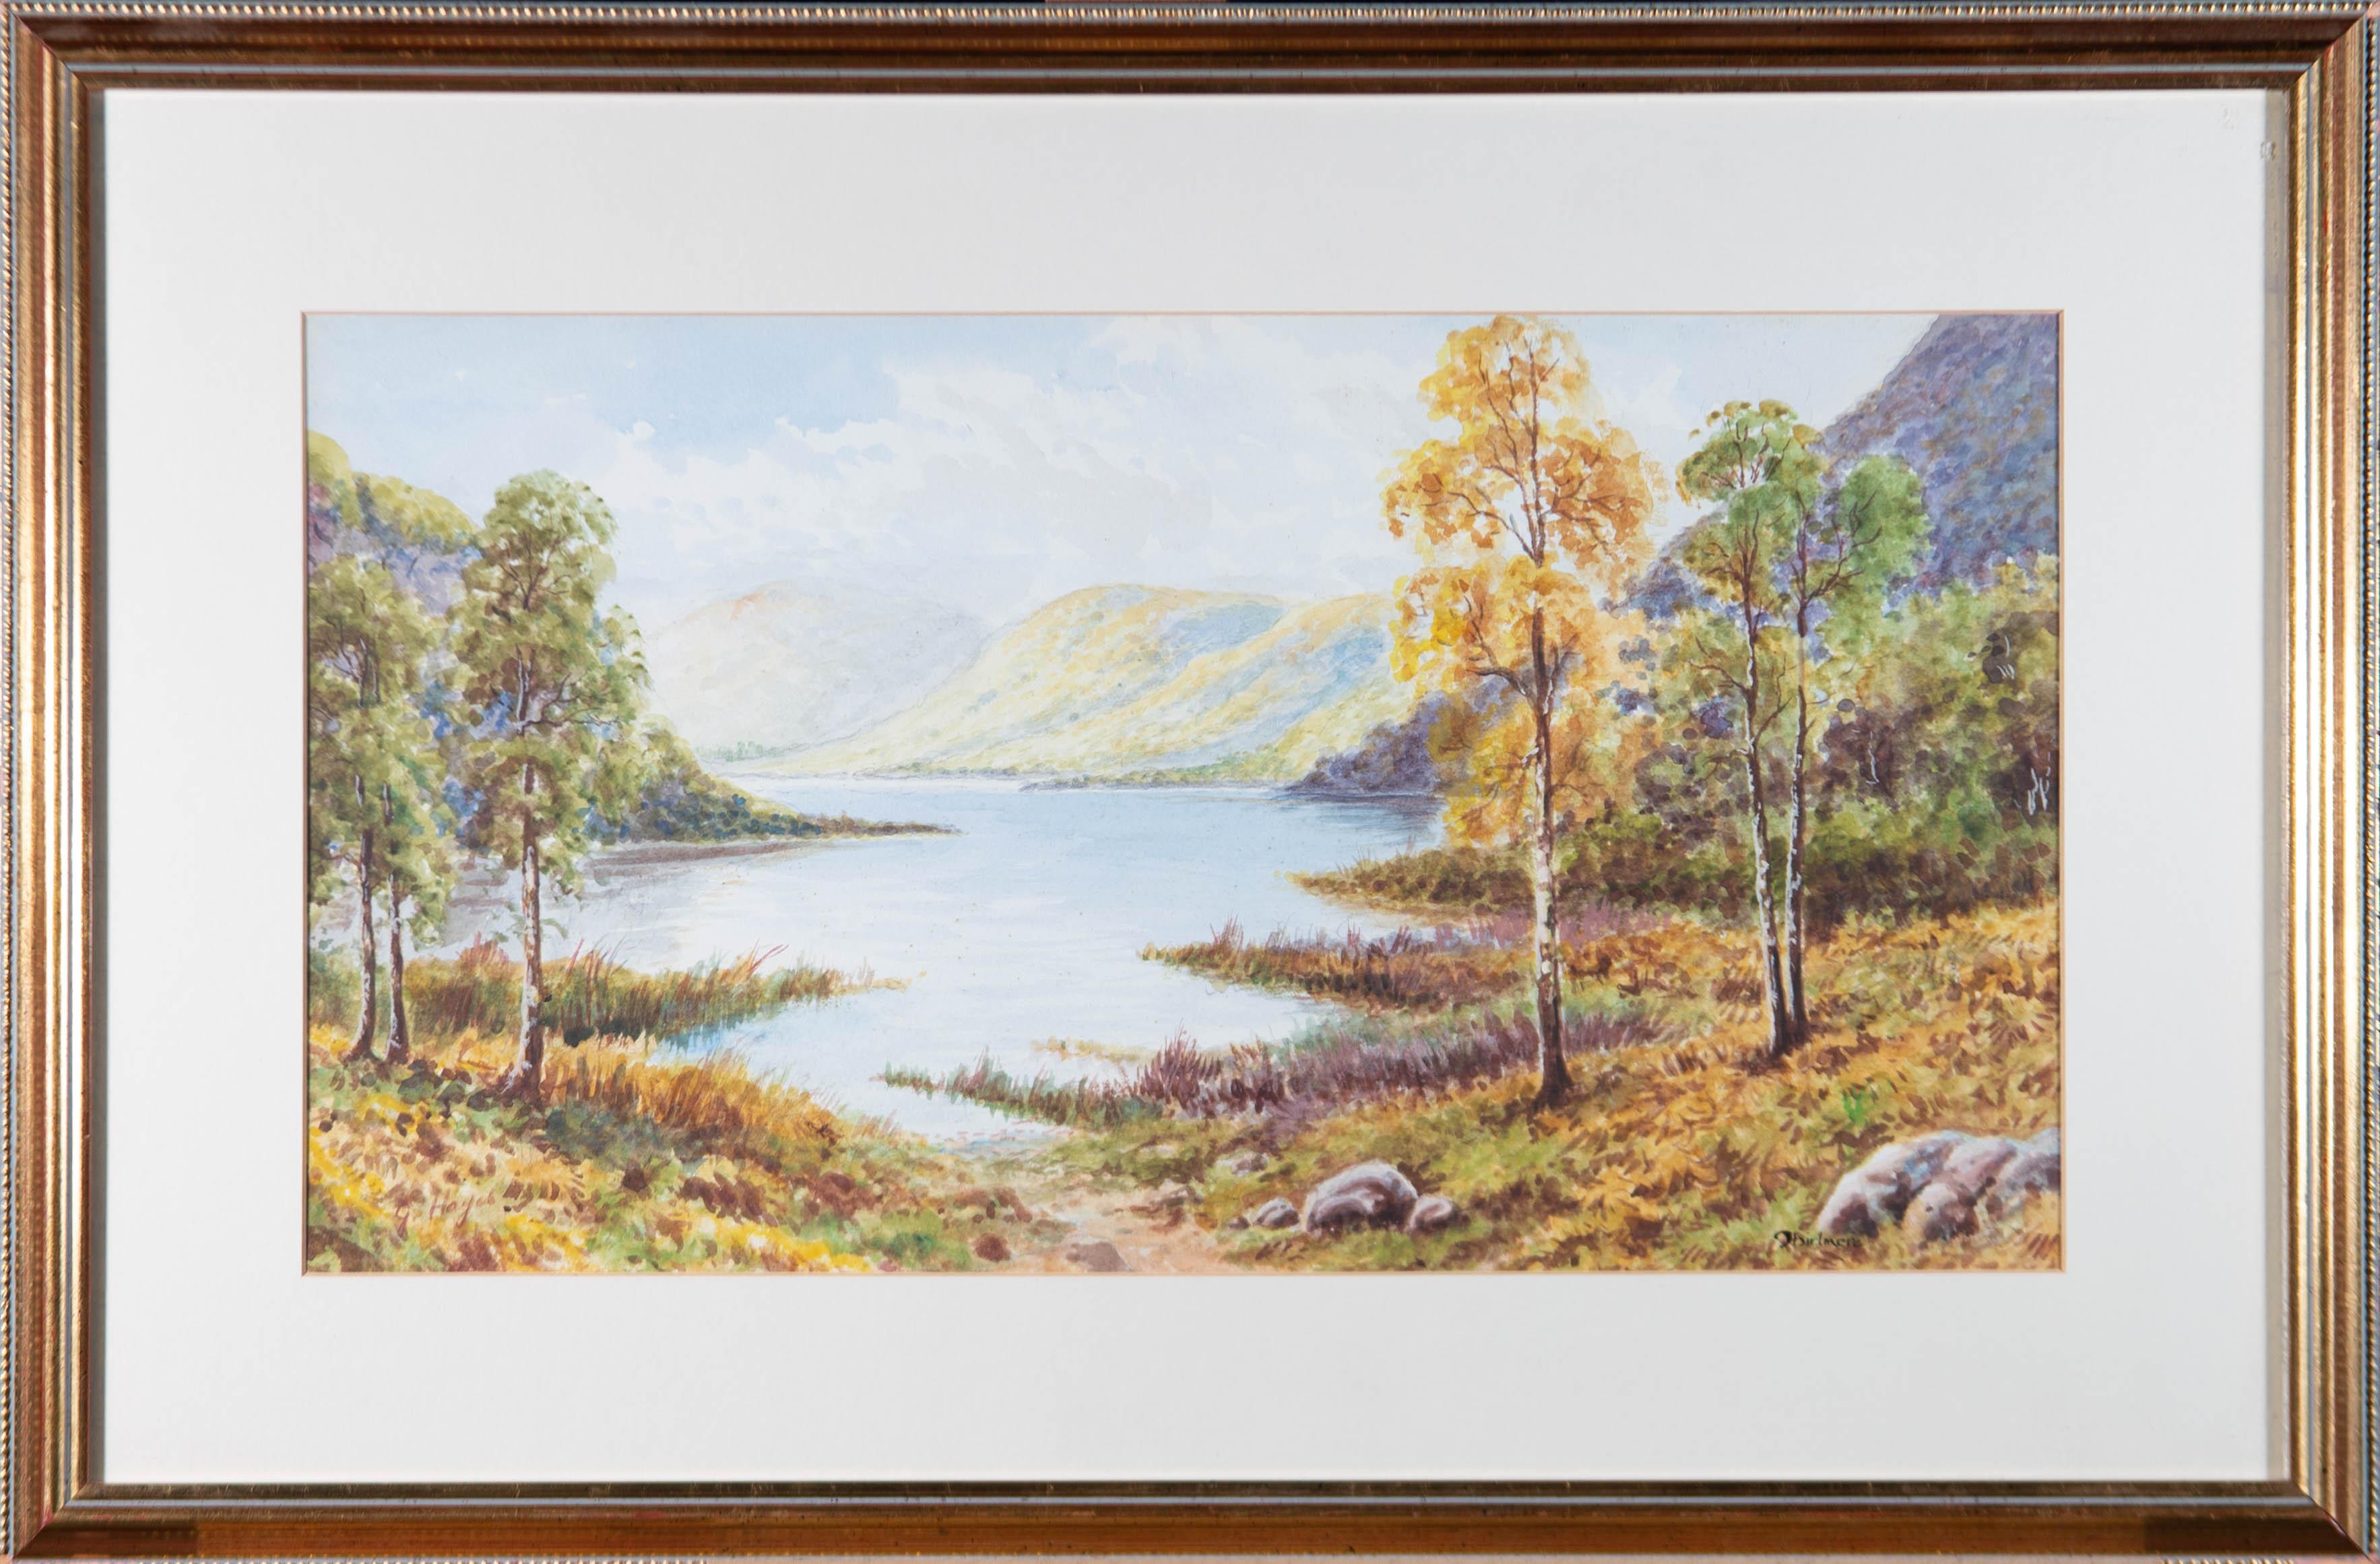 A bright palette is coupled with decisive watercolour brush strokes to render a peaceful autumnal landscape. The artwork is signed in the bottom left and well presented in a molded and gilded wood frame with a mount board. On wove.